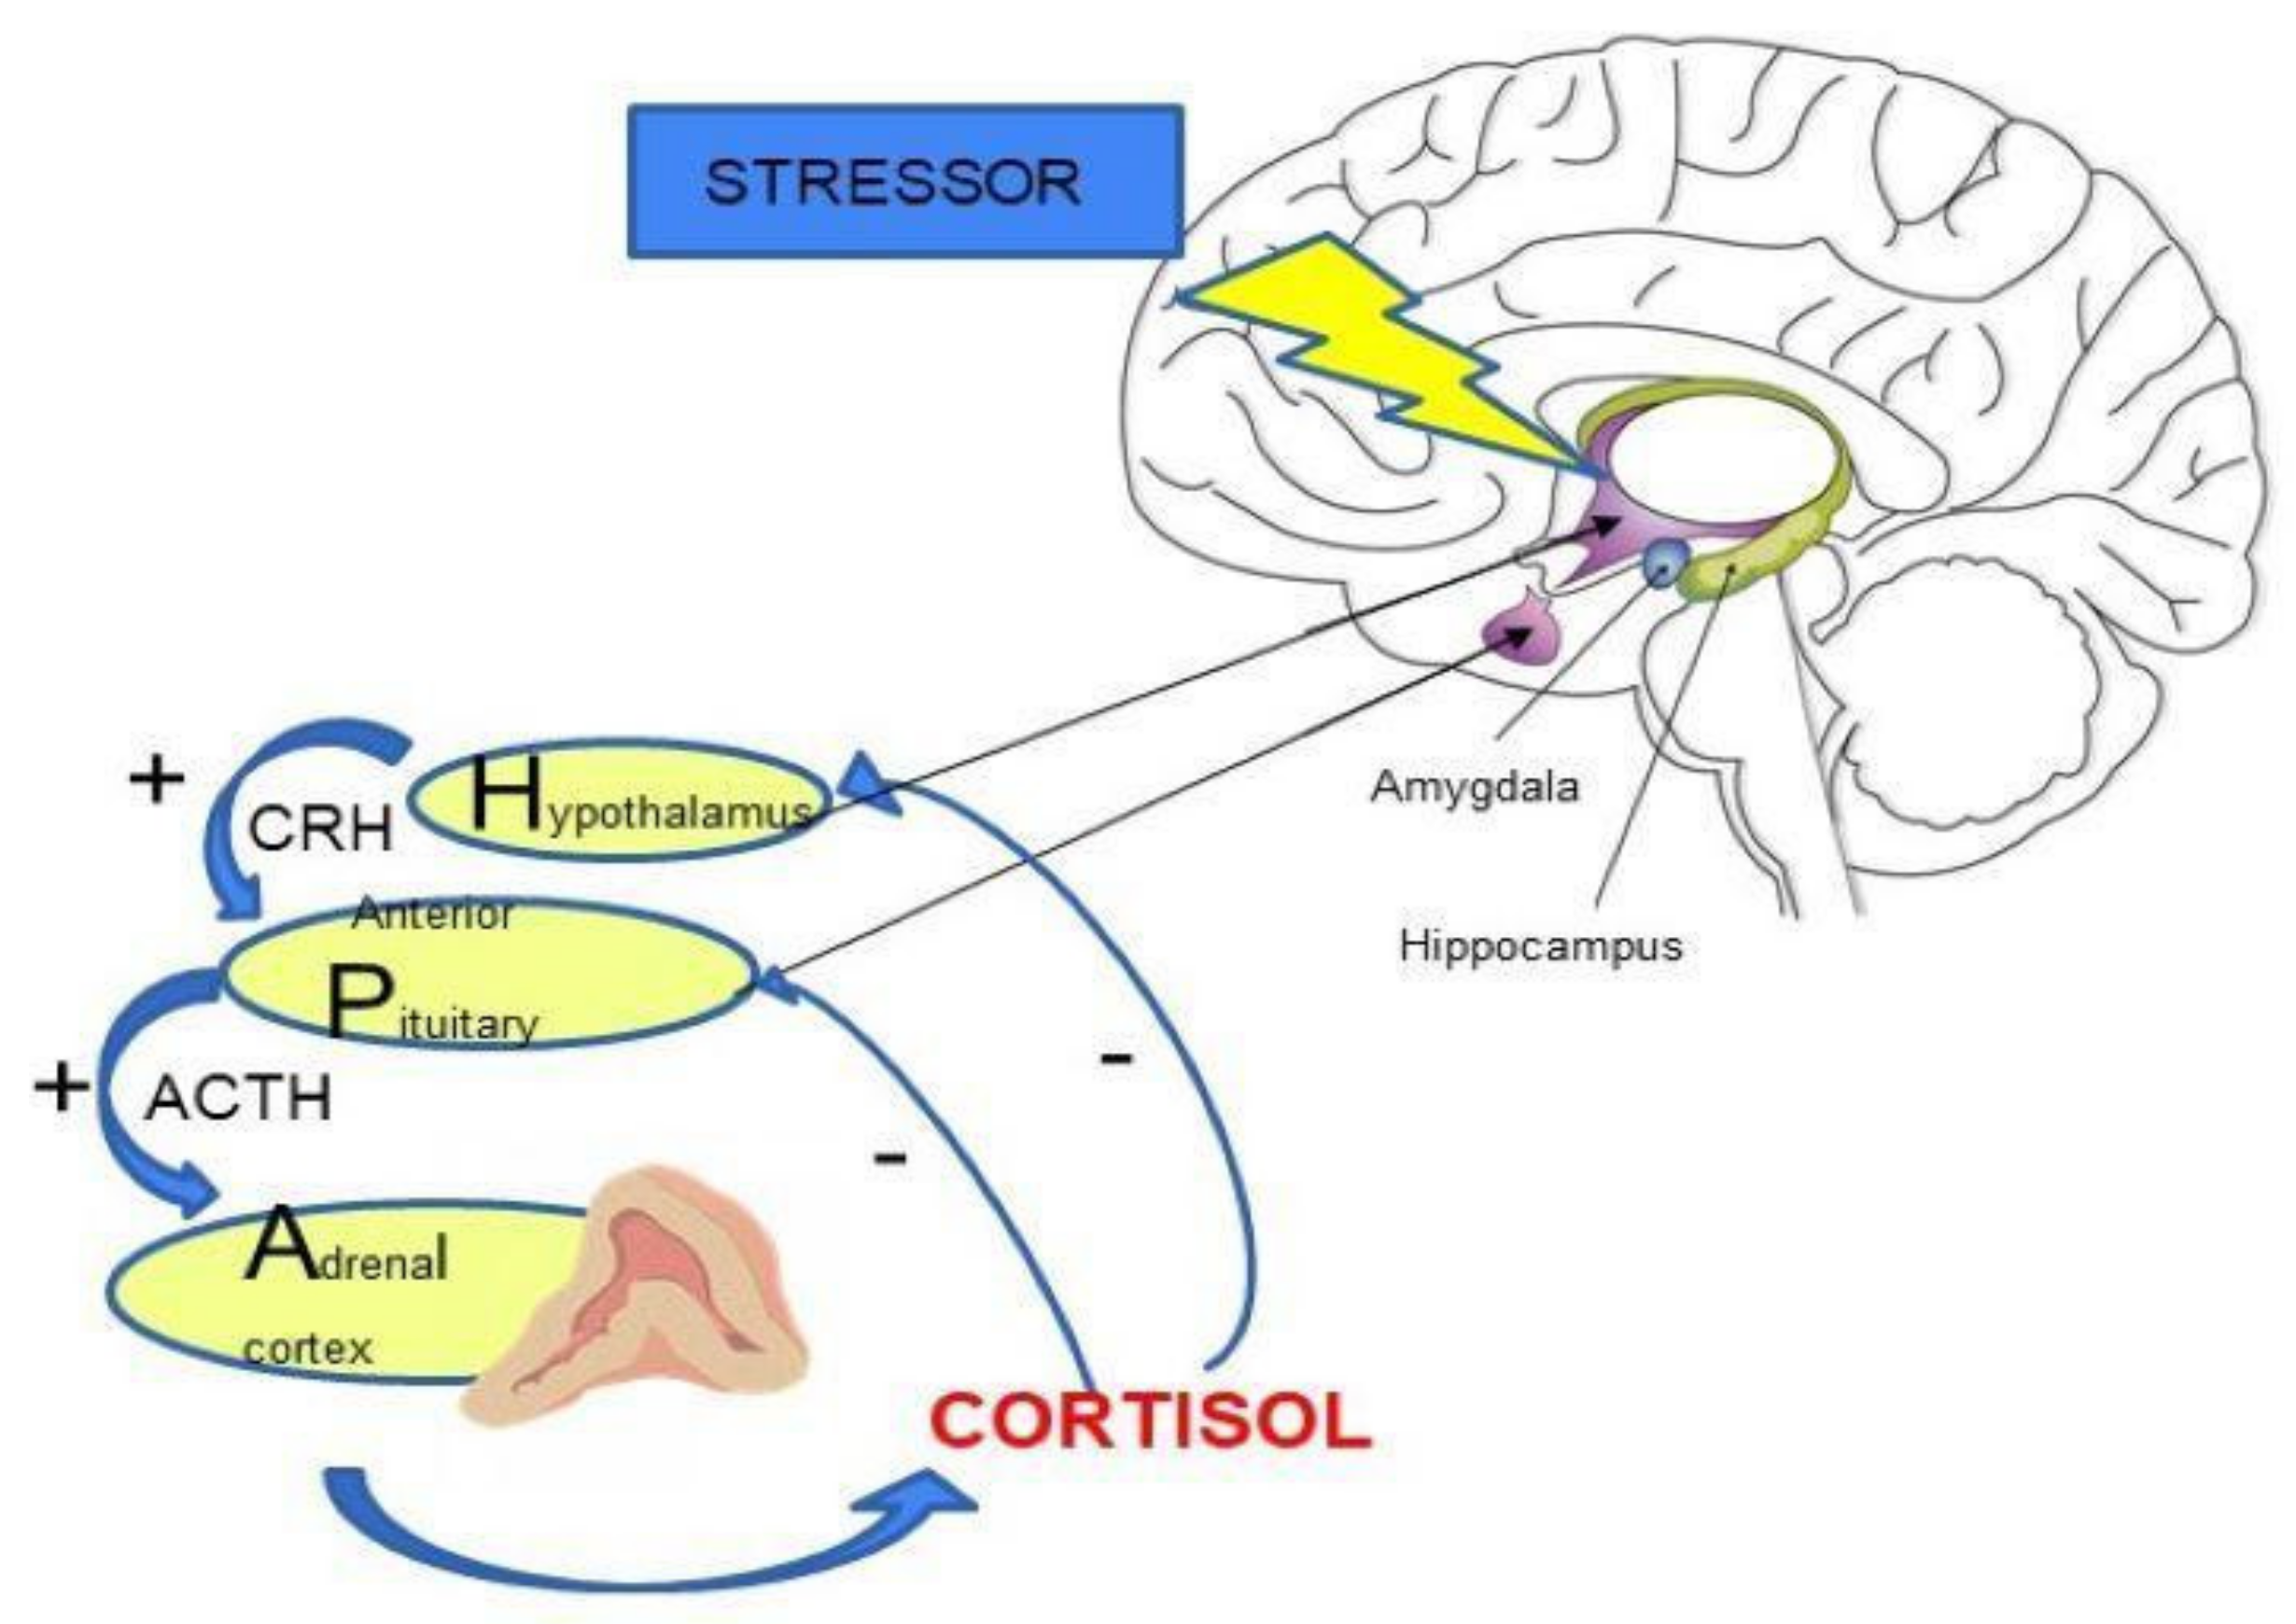 hypothesis about stress